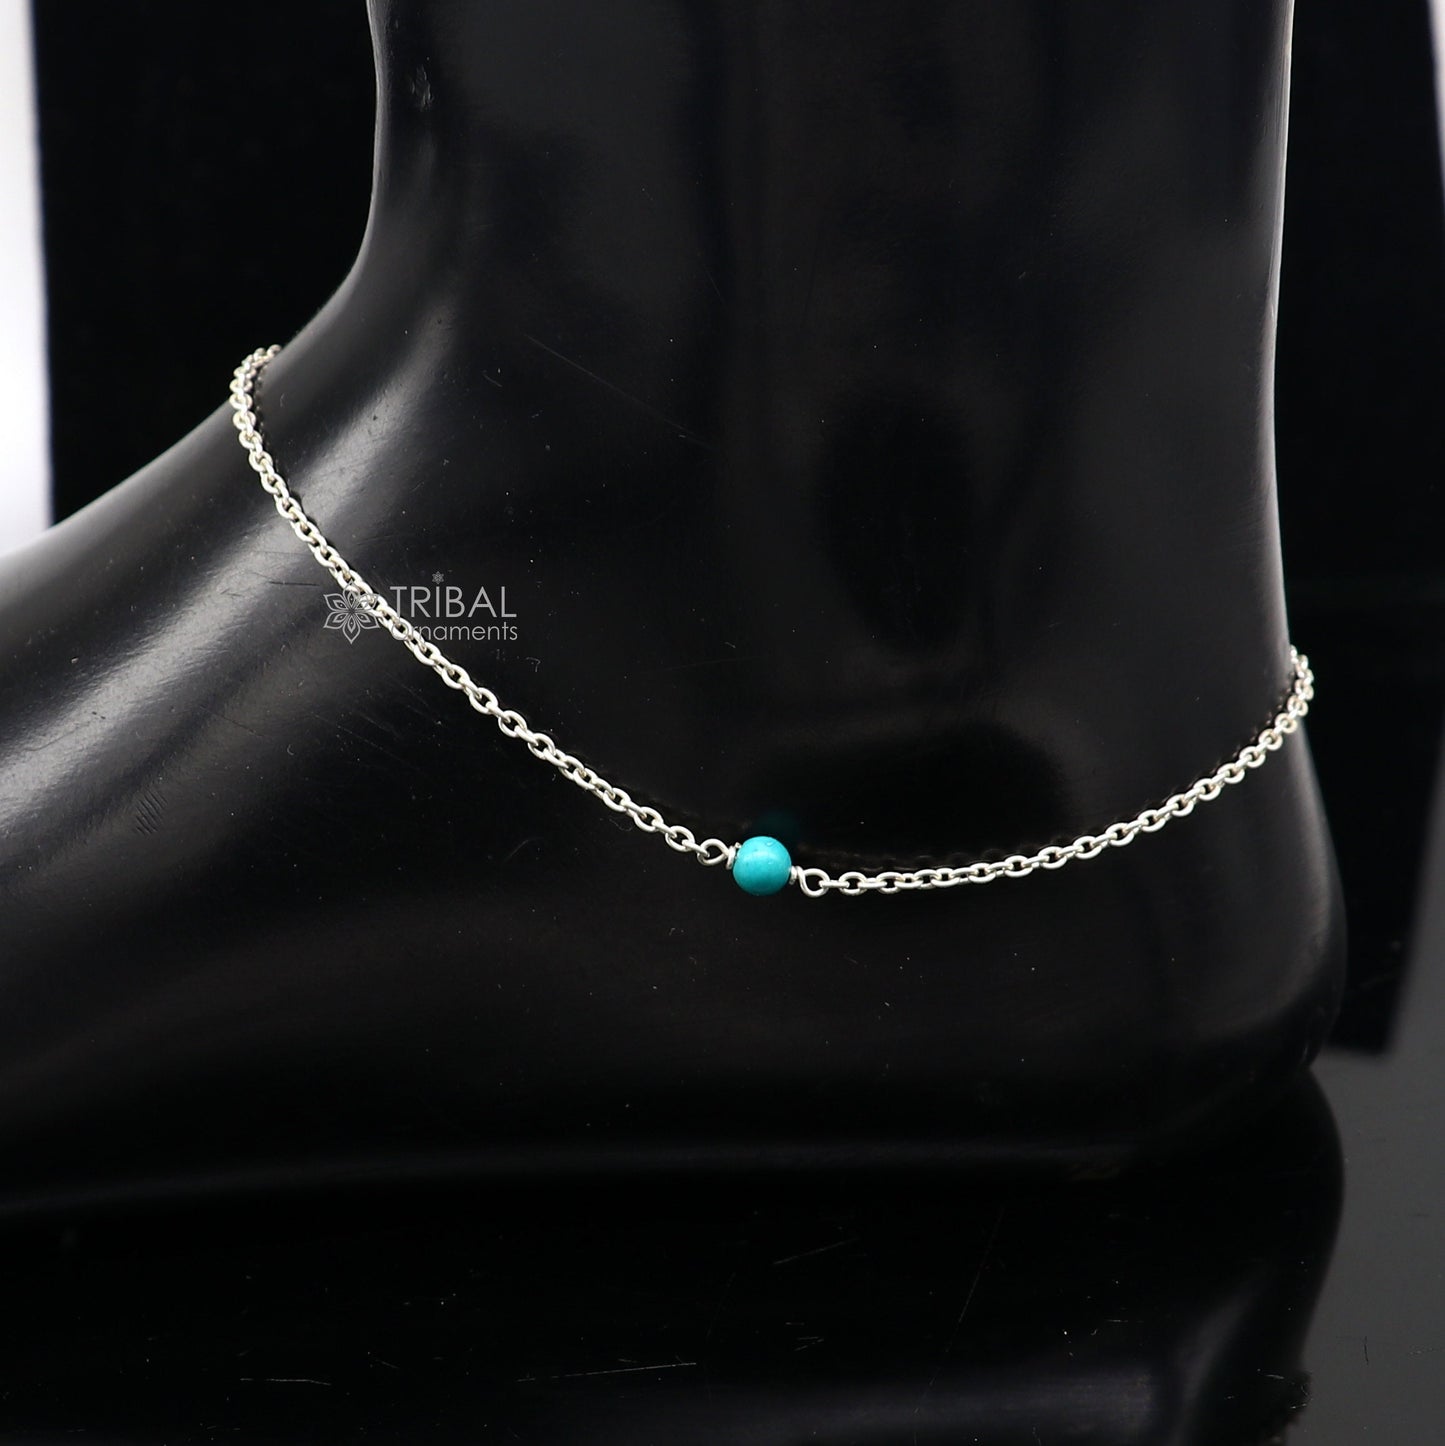 1.5mm 8"to 12" 925 sterling silver chain Single turquoise stone anklet bracelet amazing light weight delicate anklets silver jewelry ank582 - TRIBAL ORNAMENTS